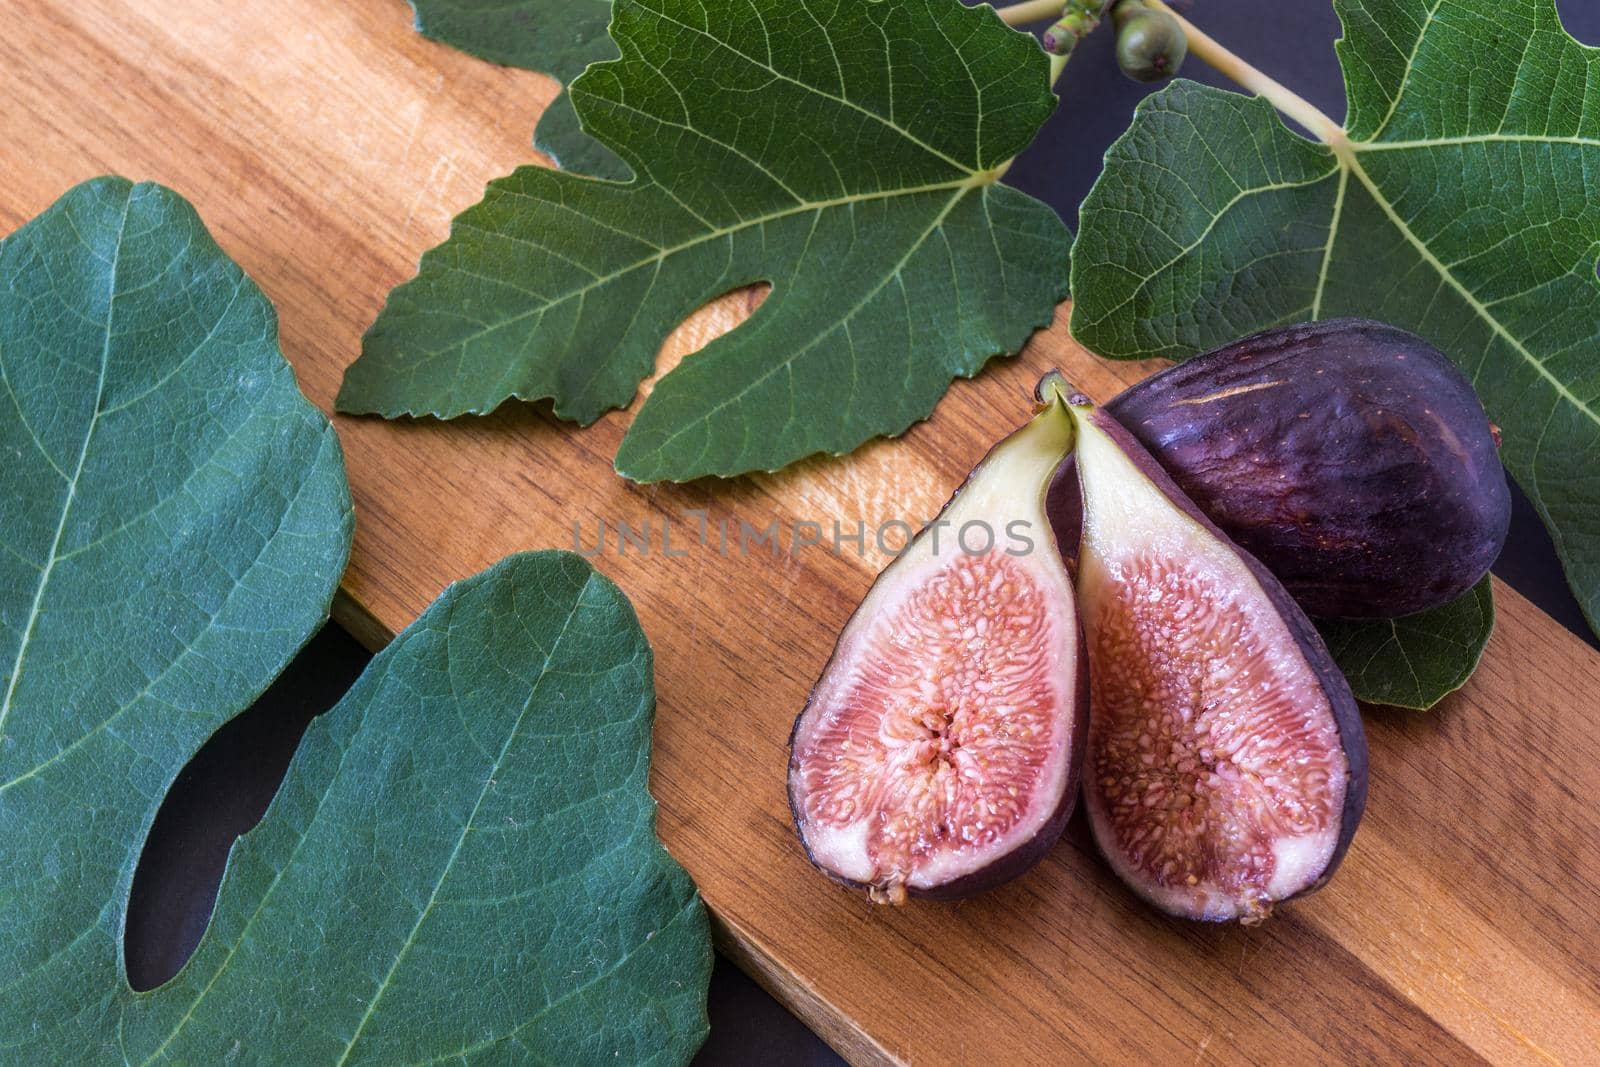 fresh cut figs on a brown wooden board surrounded by fig leaves in landscape format with natural lighting